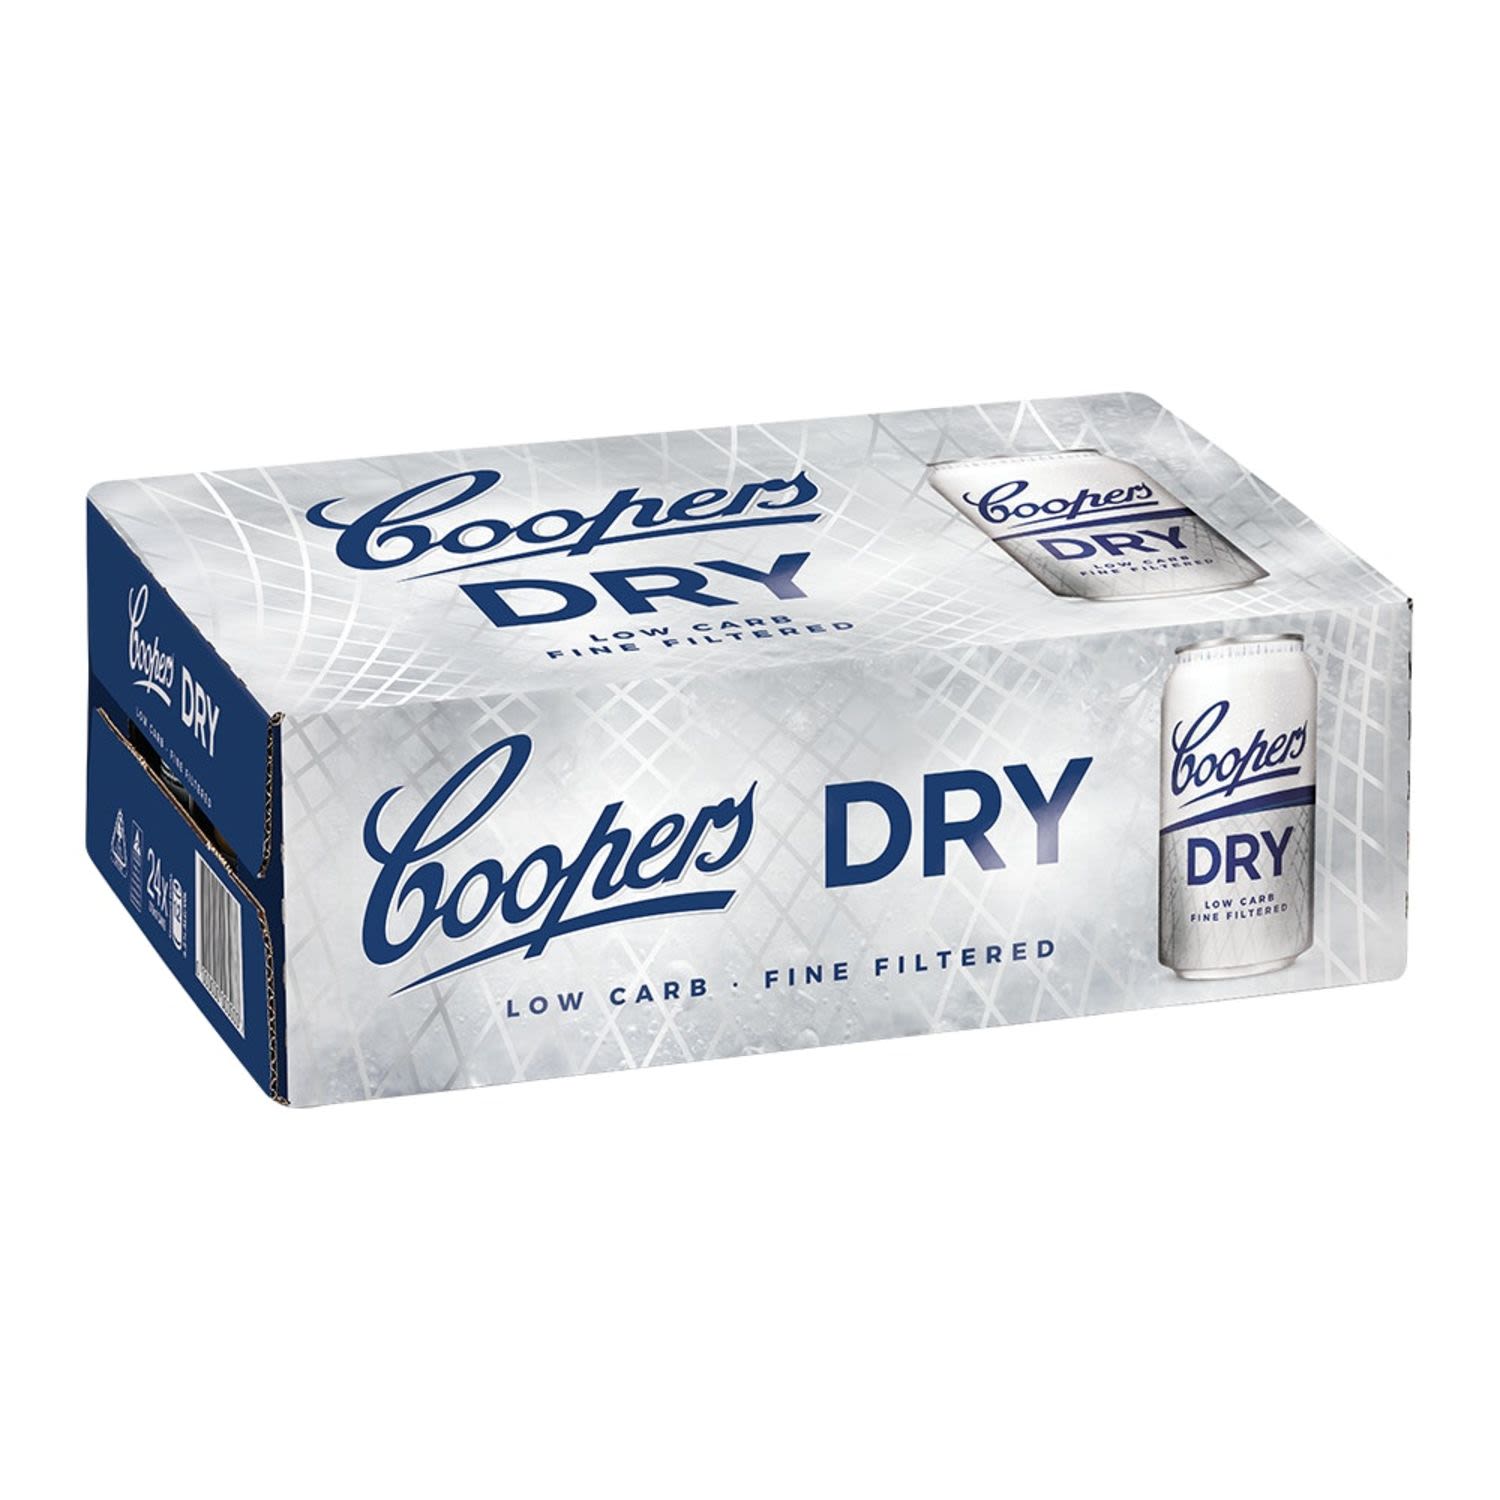 Coopers Dry Low Carb Can 375mL 24 Pack